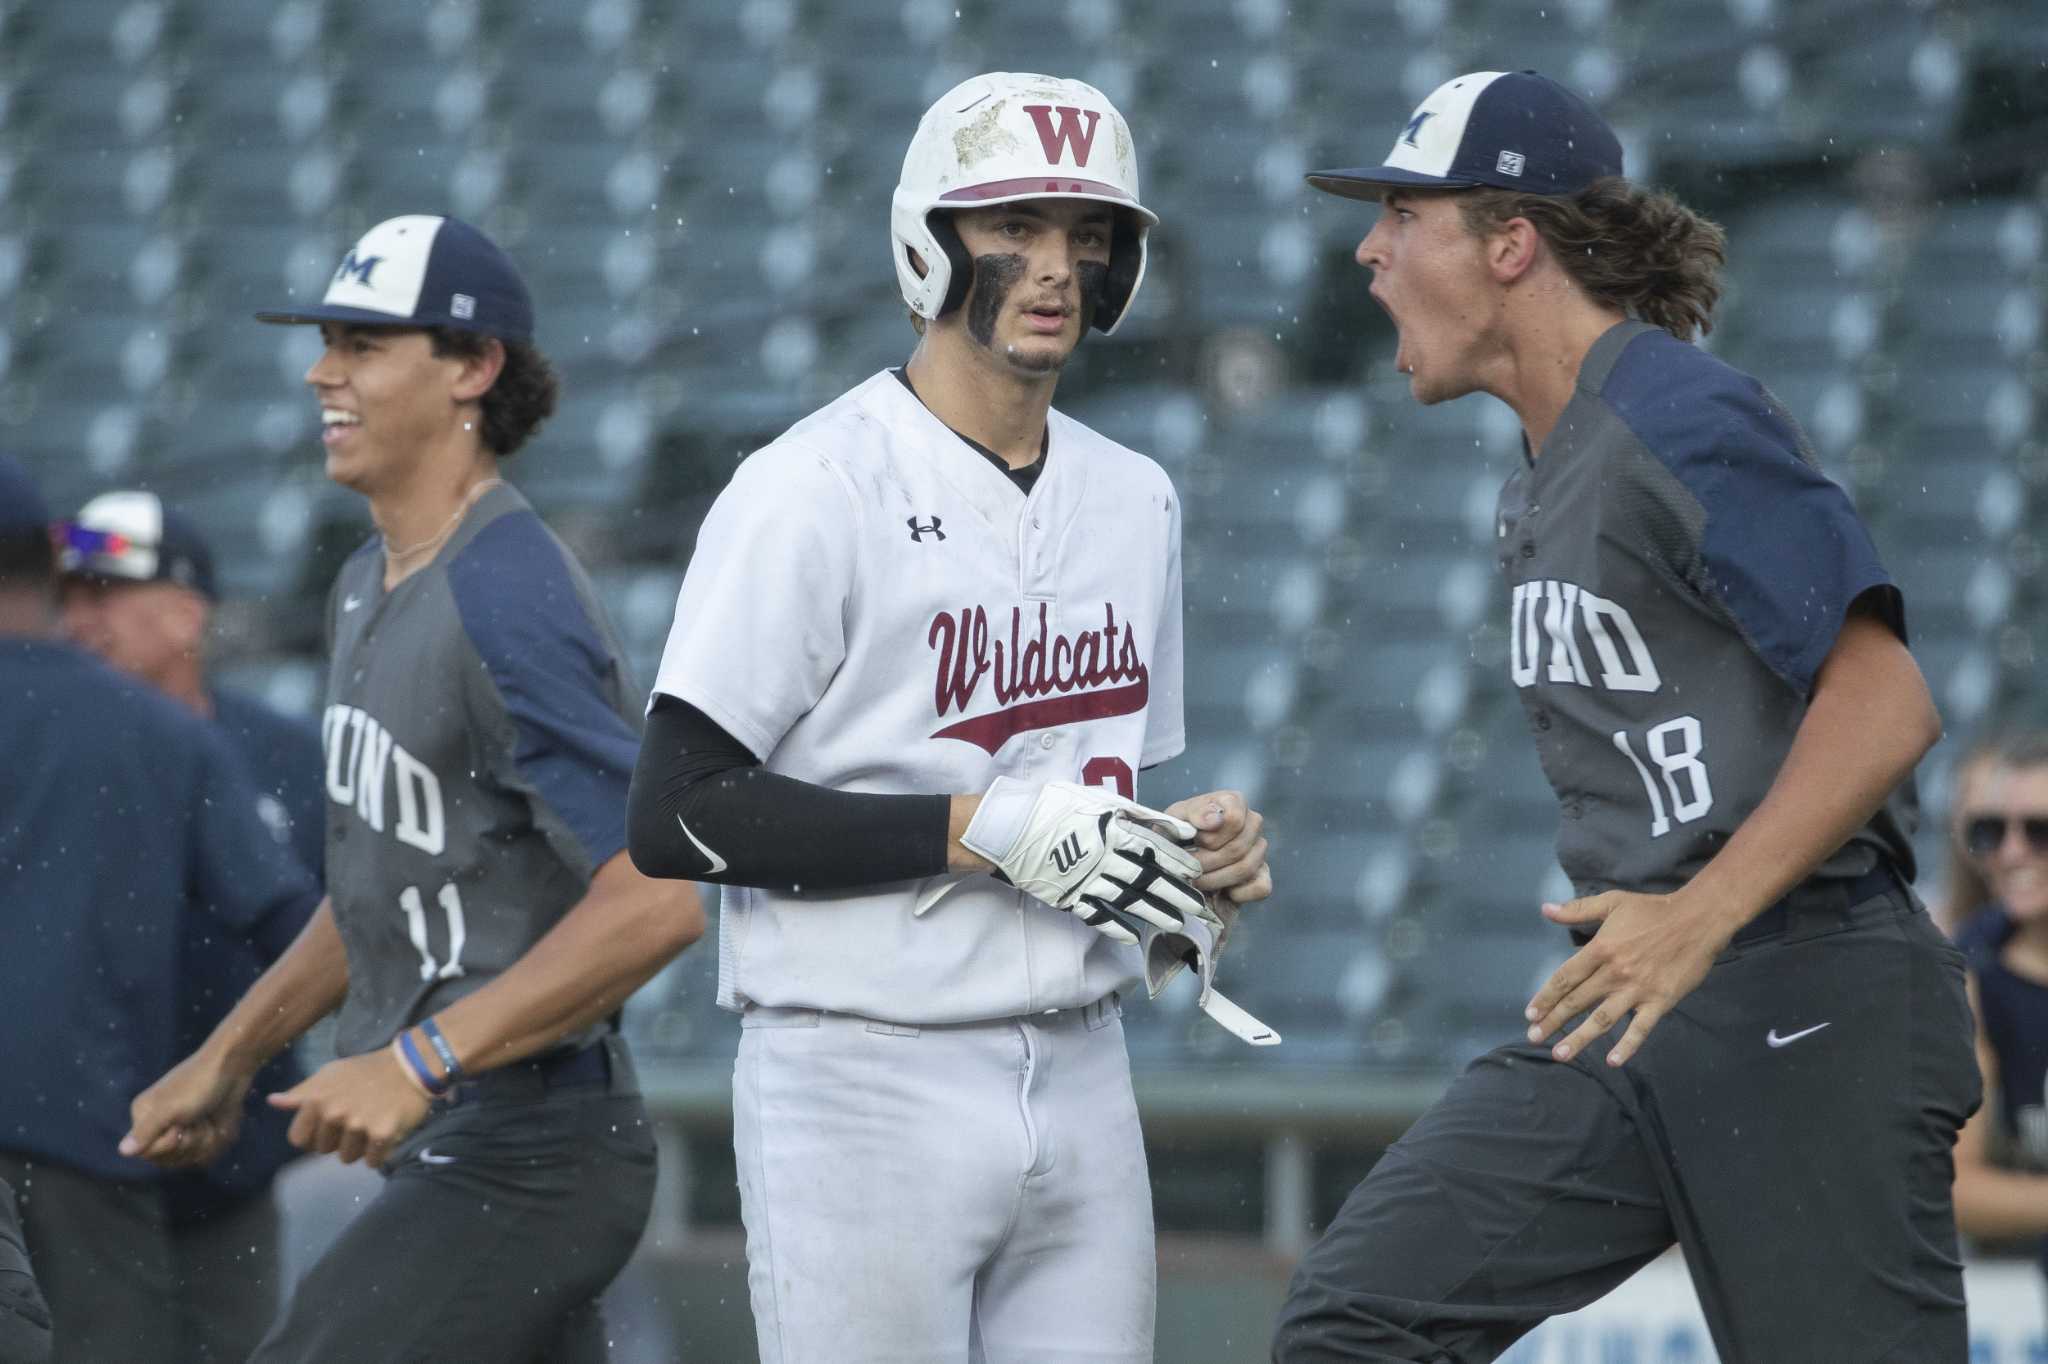 Cypress Woods falls to Flower Mound in state baseball tournament